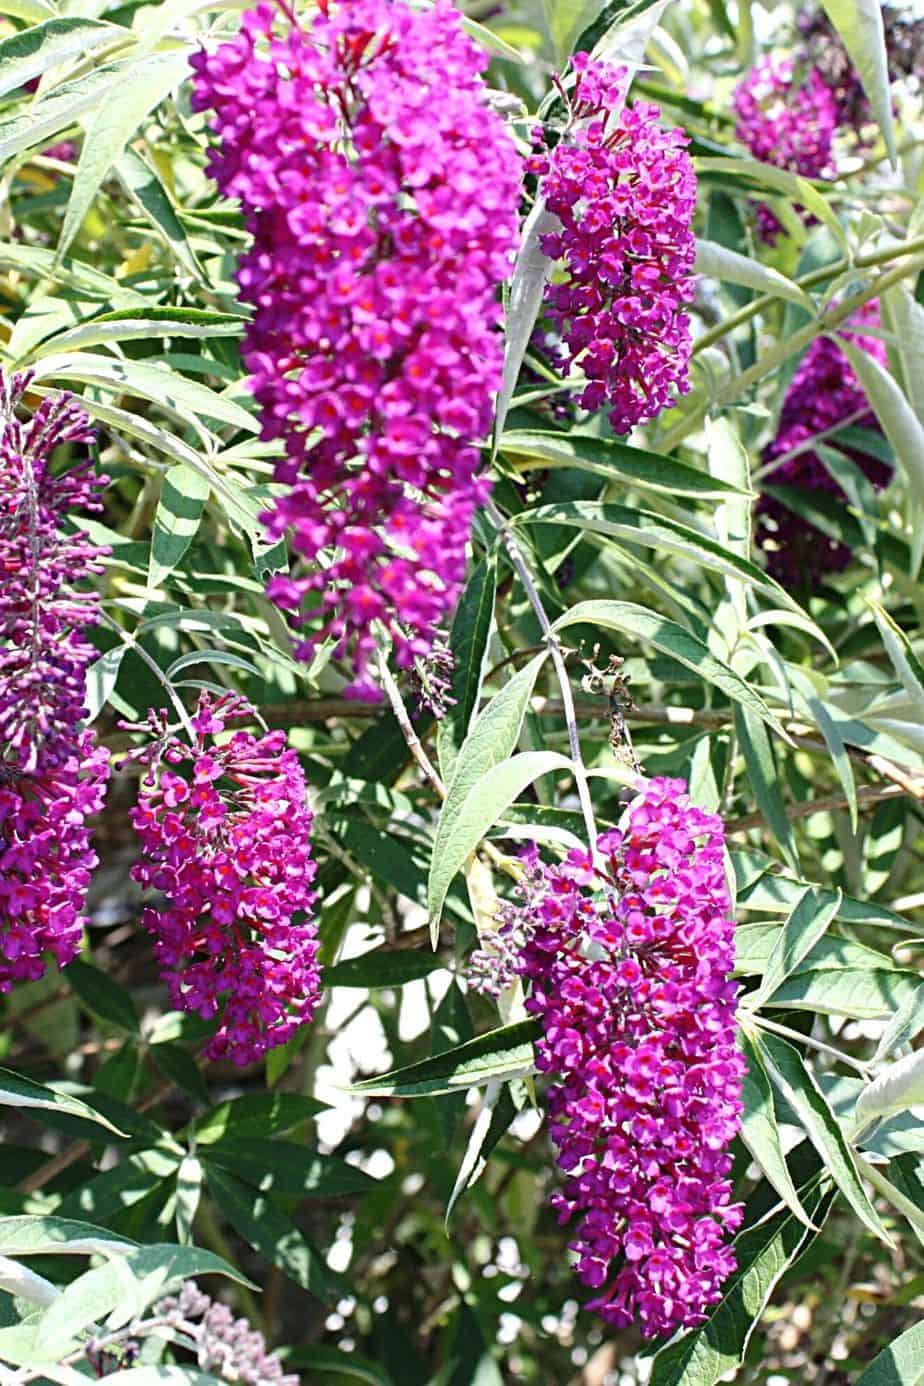 Butterfly Bush is a great plant for privacy as not only does it provide some sort of a fence, it attracts pollinating insects also